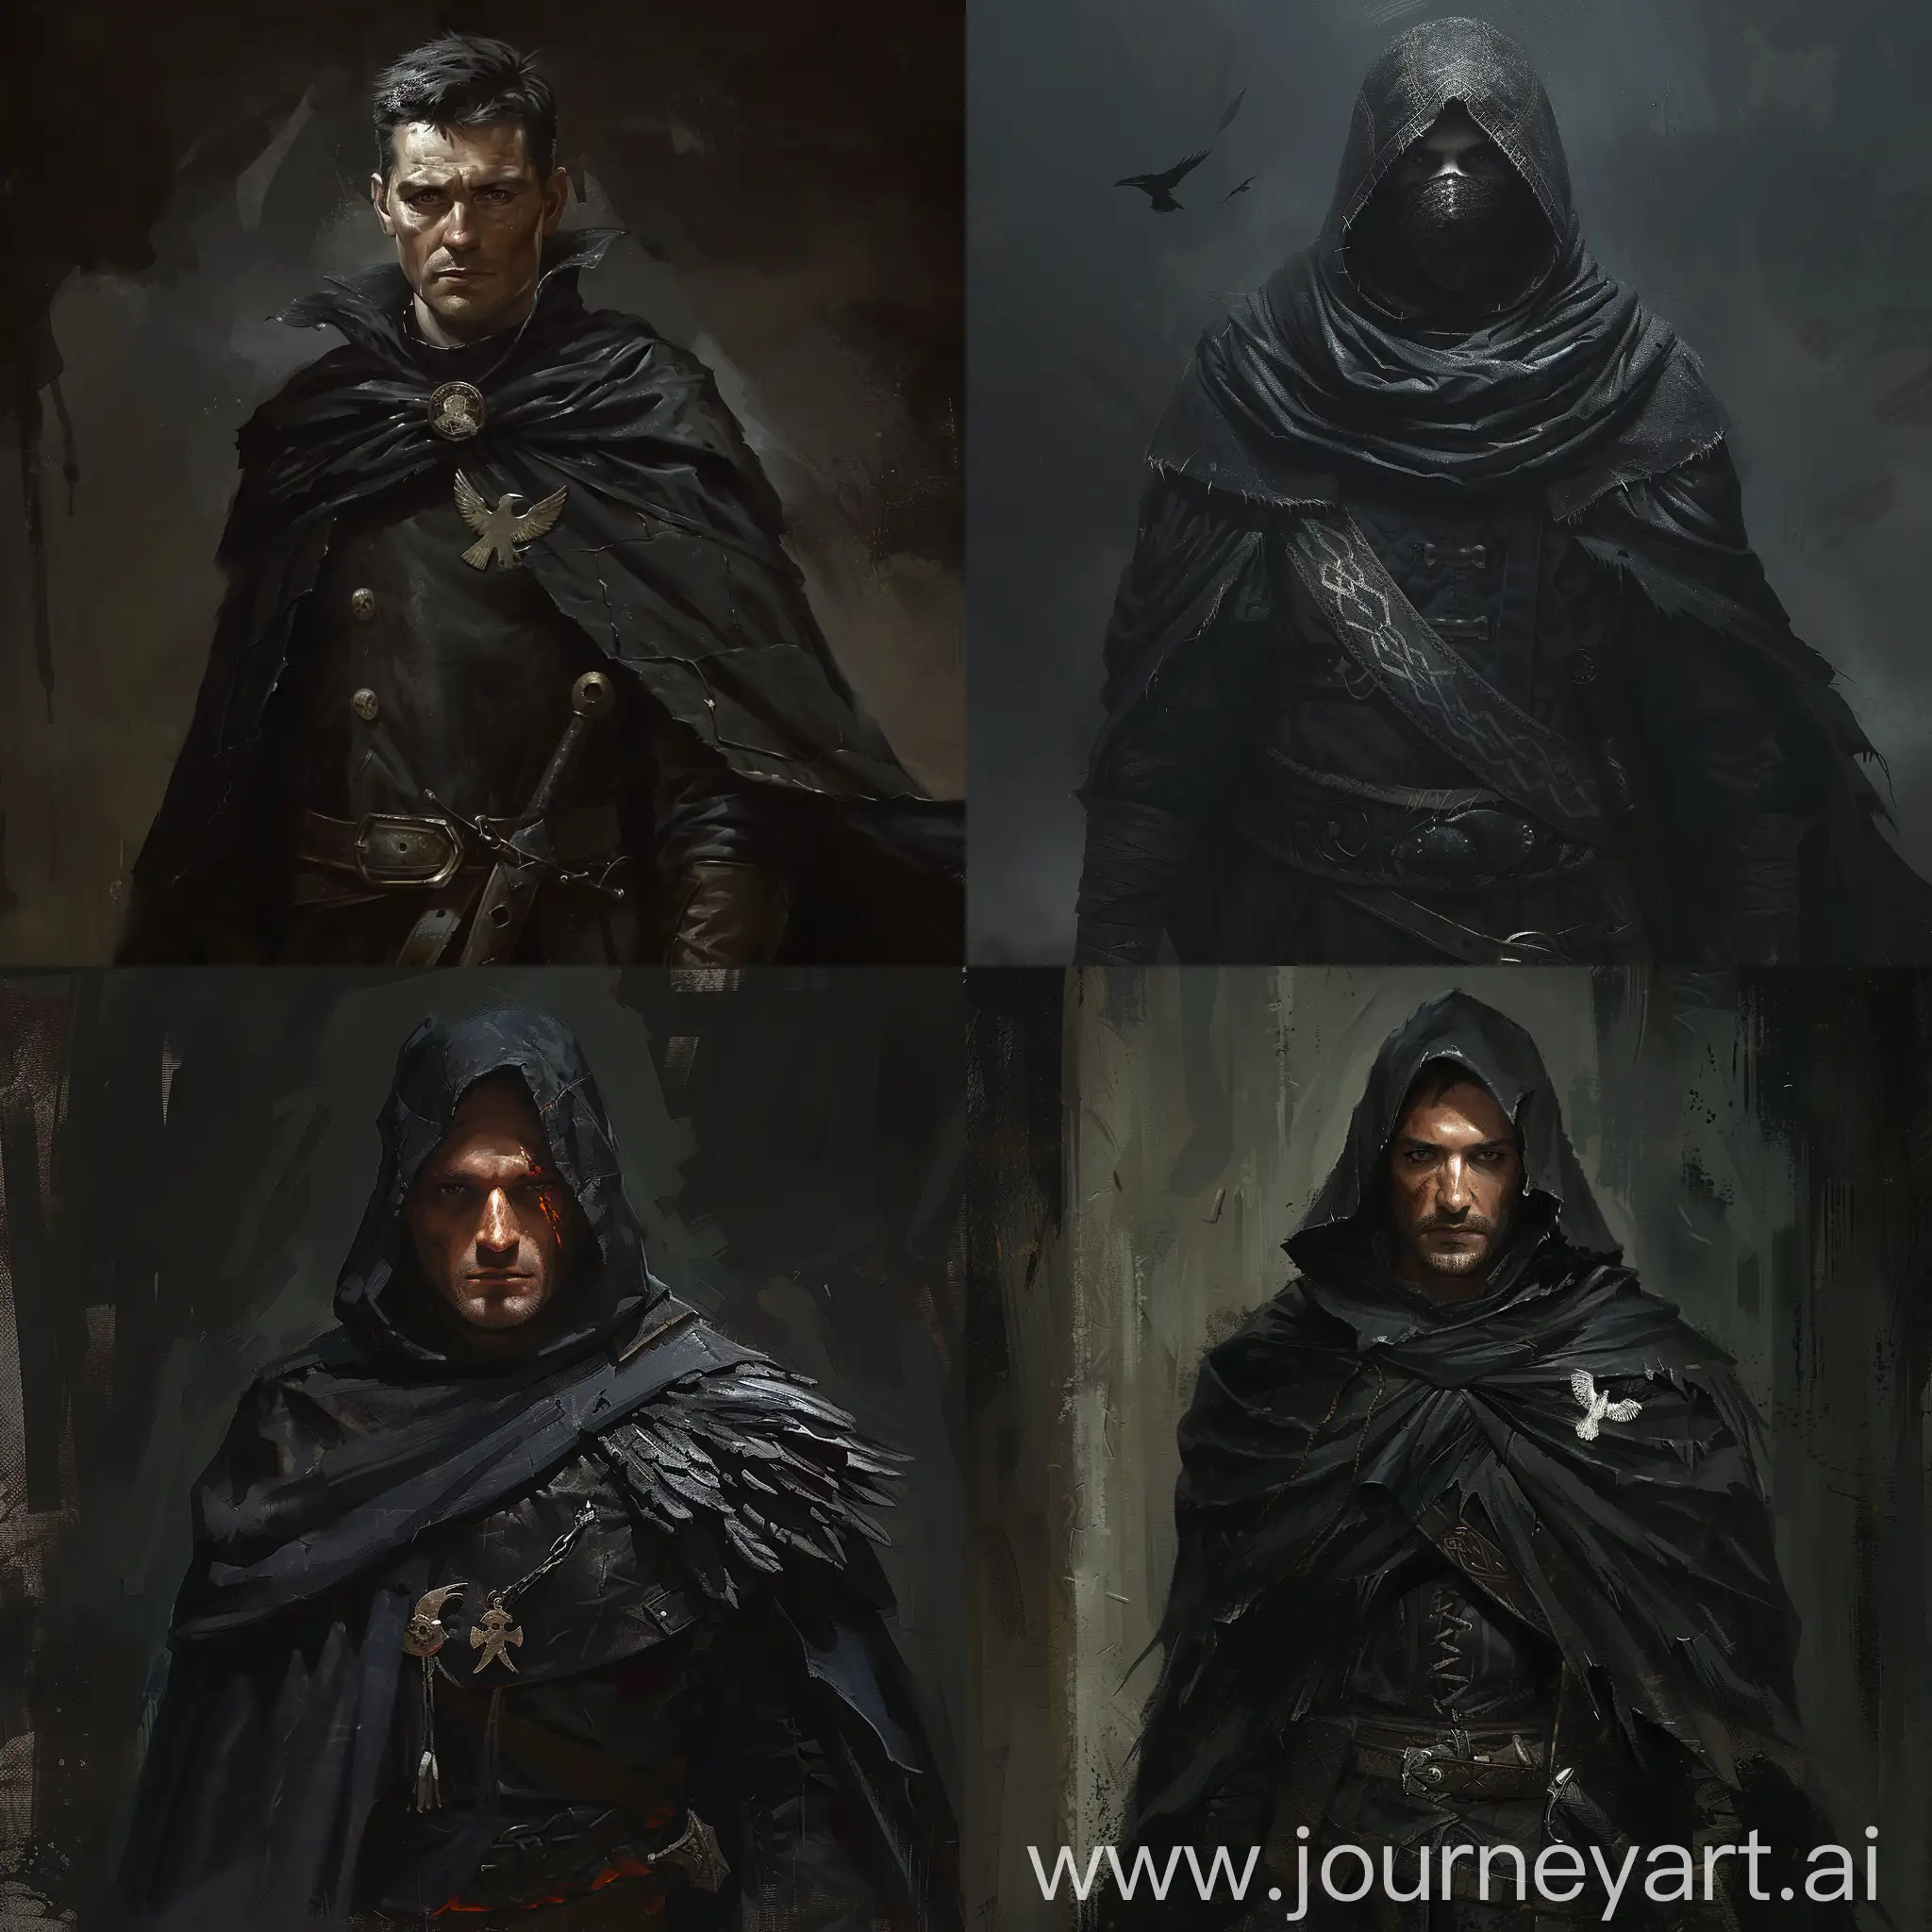 man in black,wearing a rob and has a raven symbol on his cloth.Male human DnD.Background is dark.